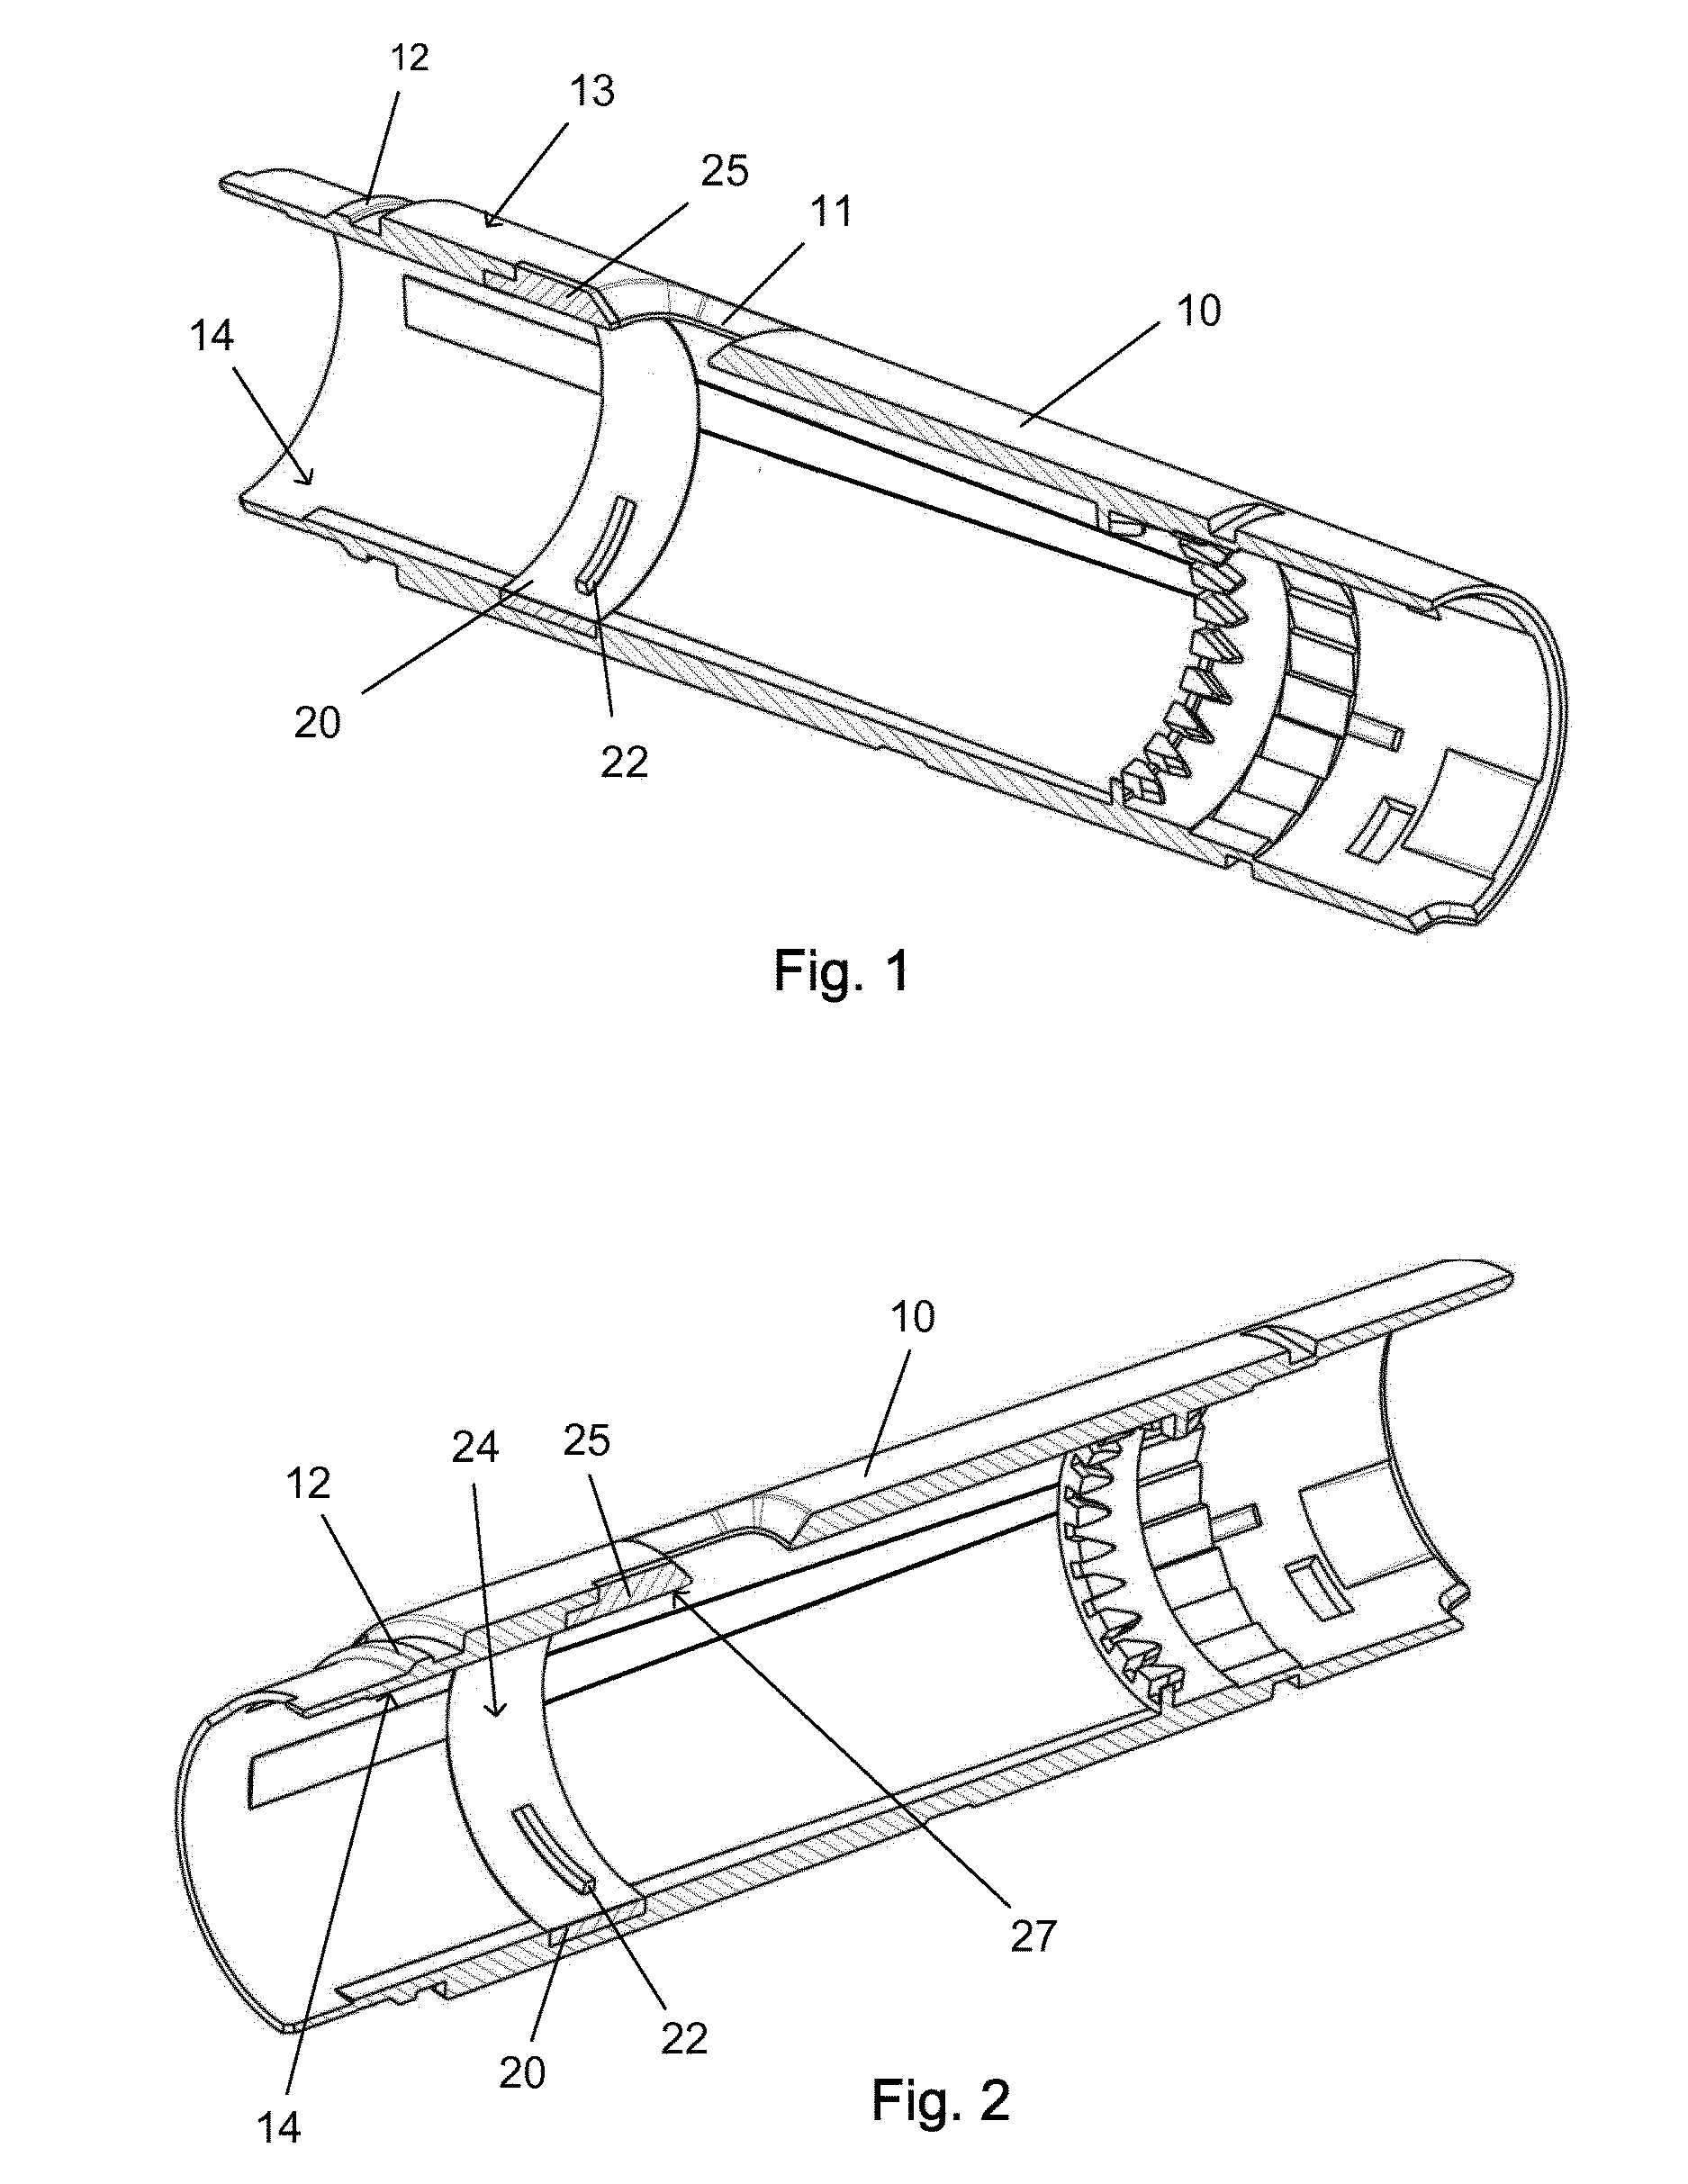 A Housing for a Medical Injection Device